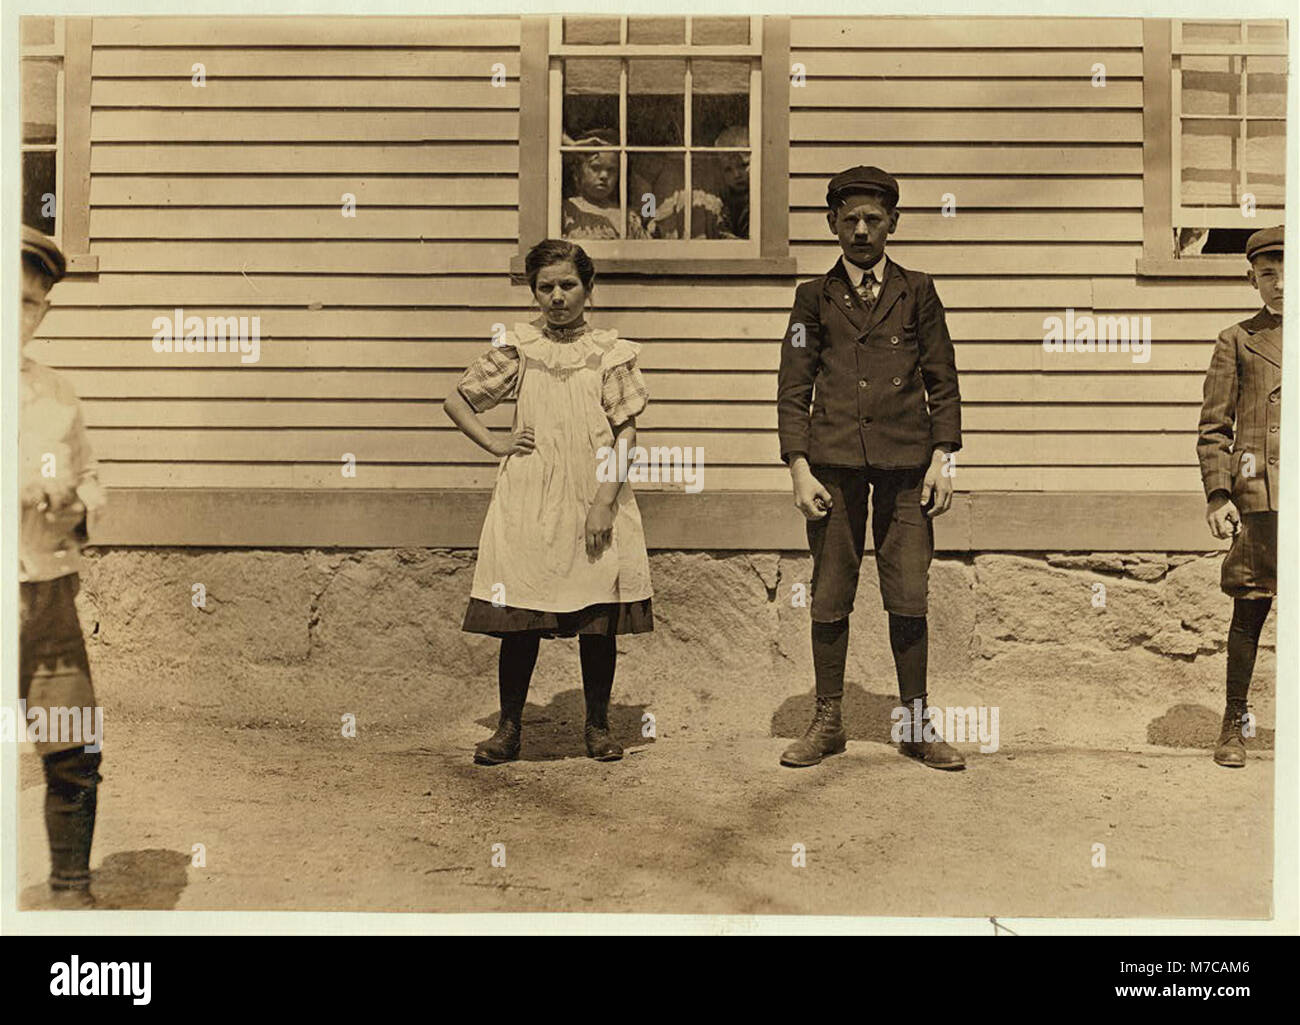 Edward St. Germain and sister Delia. She has been working in Phoenix (R.I.) Mill for 8 months. He works also. They cannot speak English. LOC nclc.01680 Stock Photo